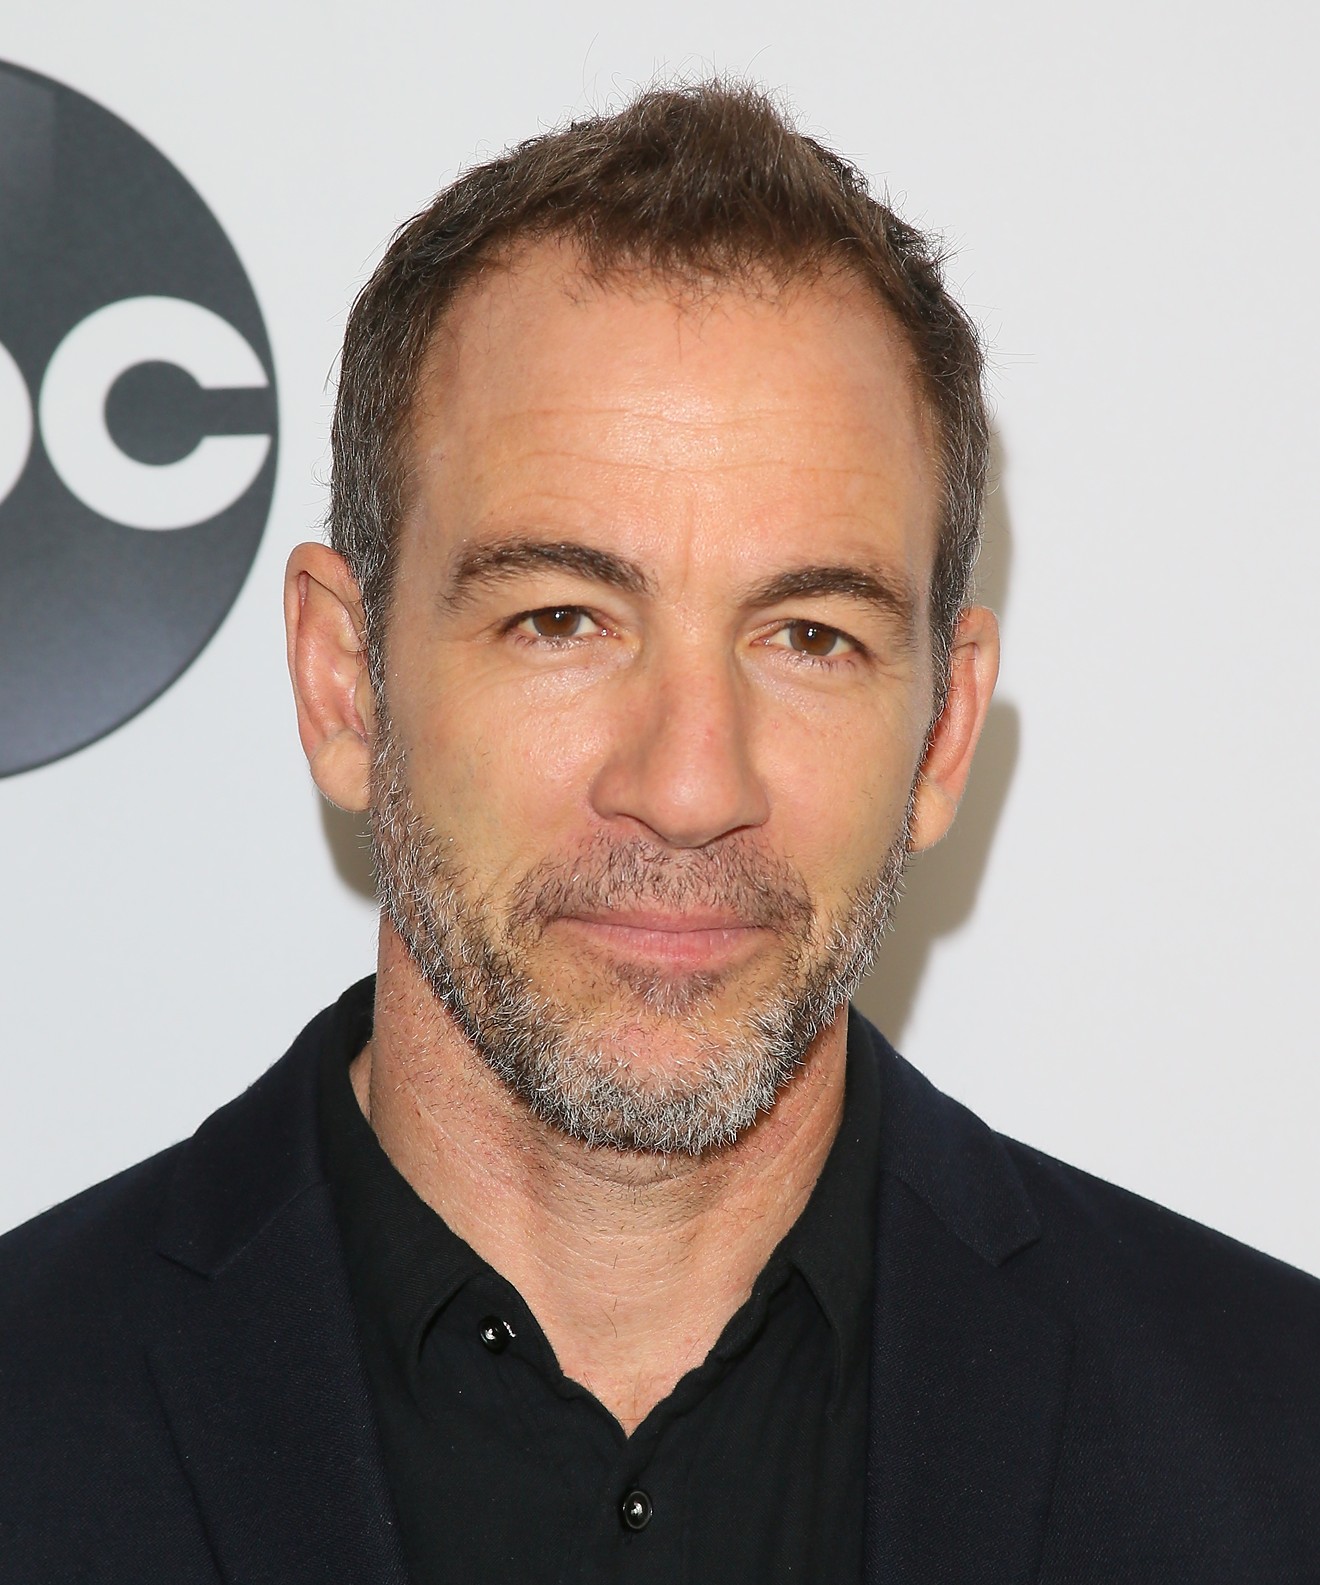 Bryan Callen performed Friday and Saturday at the Addison Improv, despite the recent allegations of sexual misconduct against the comedian.